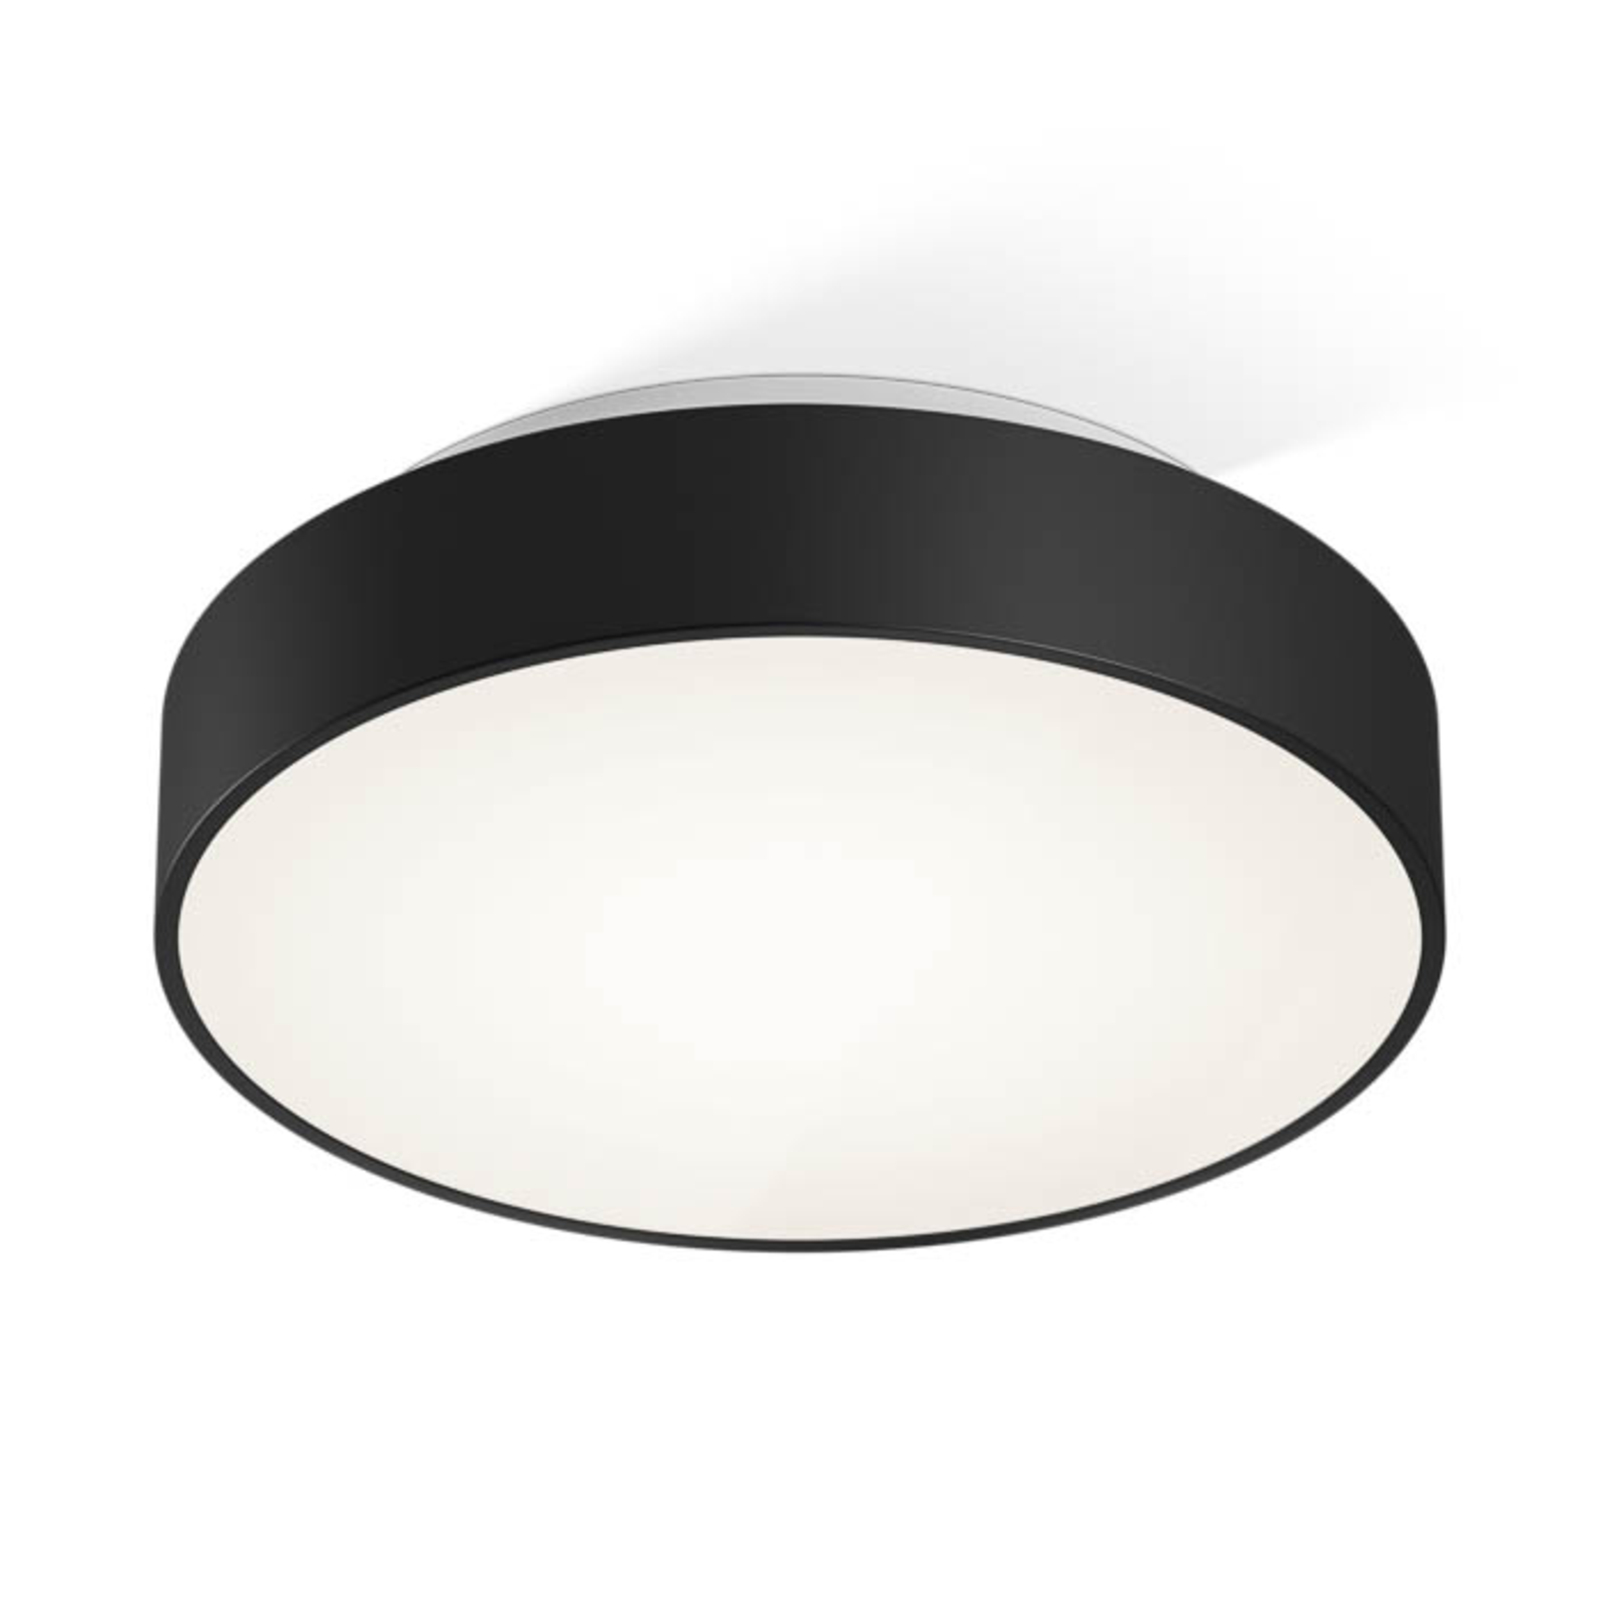 Decor Walther Conect LED ceiling lamp 32 cm black